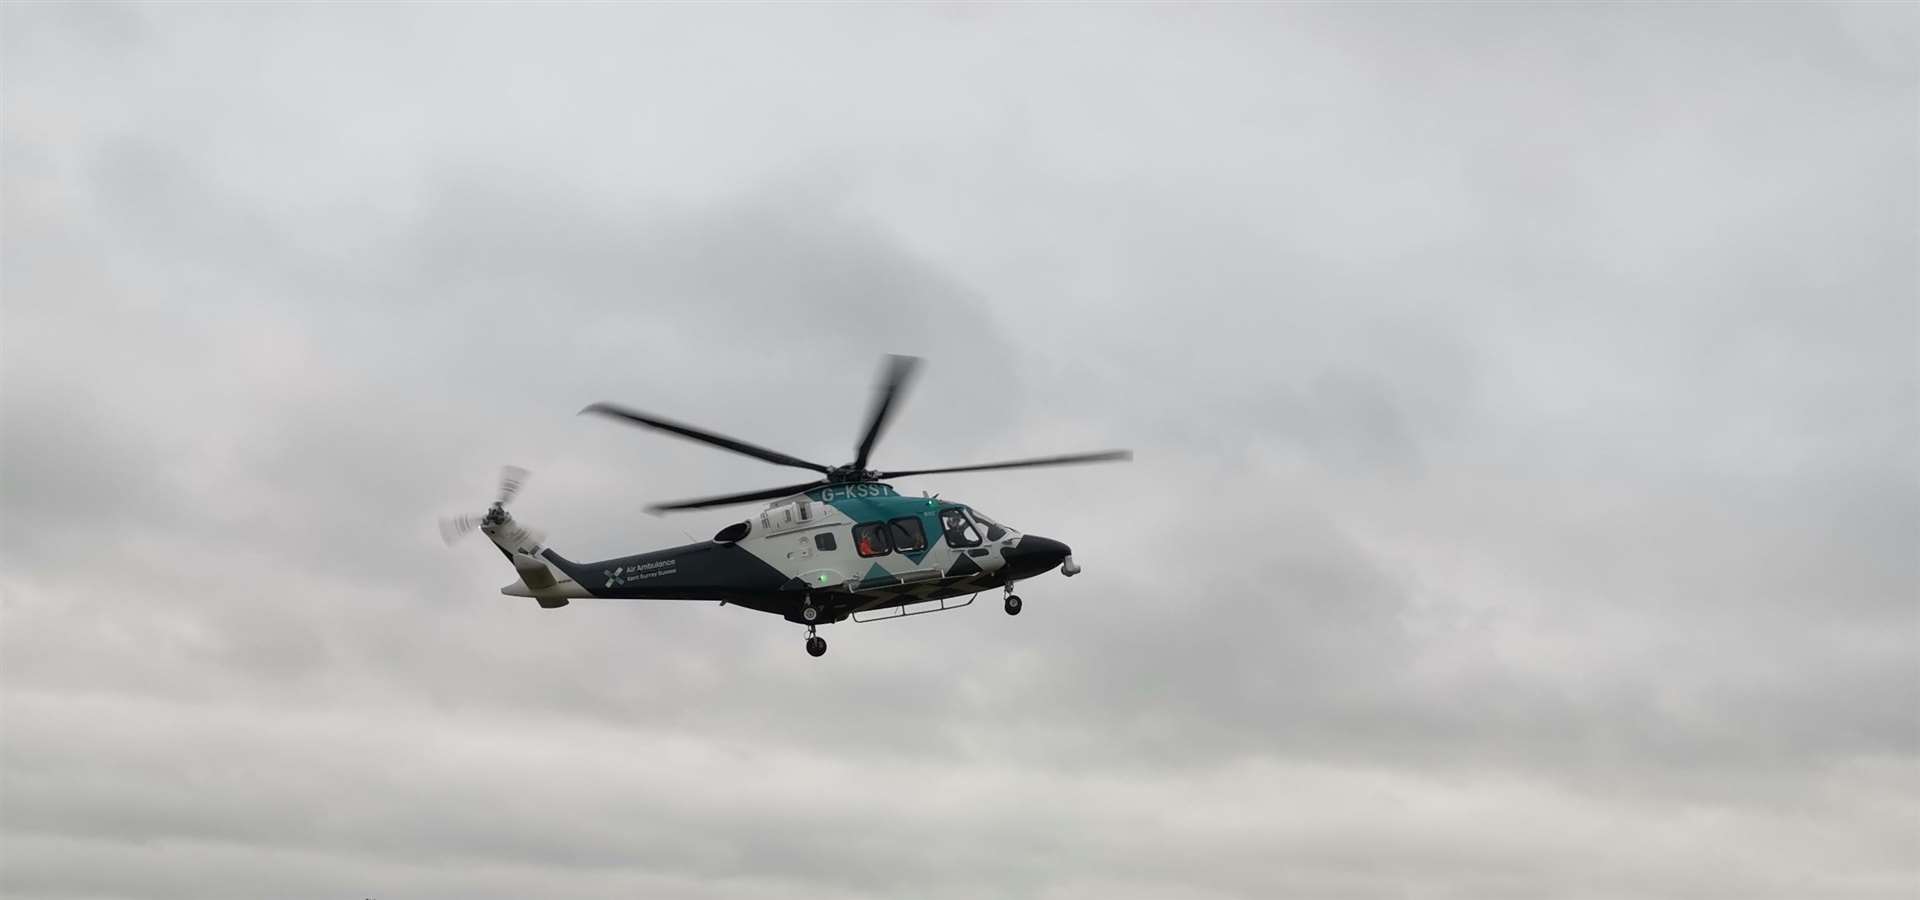 The boy was airlifted to hospital with serious injuries. Stock image.